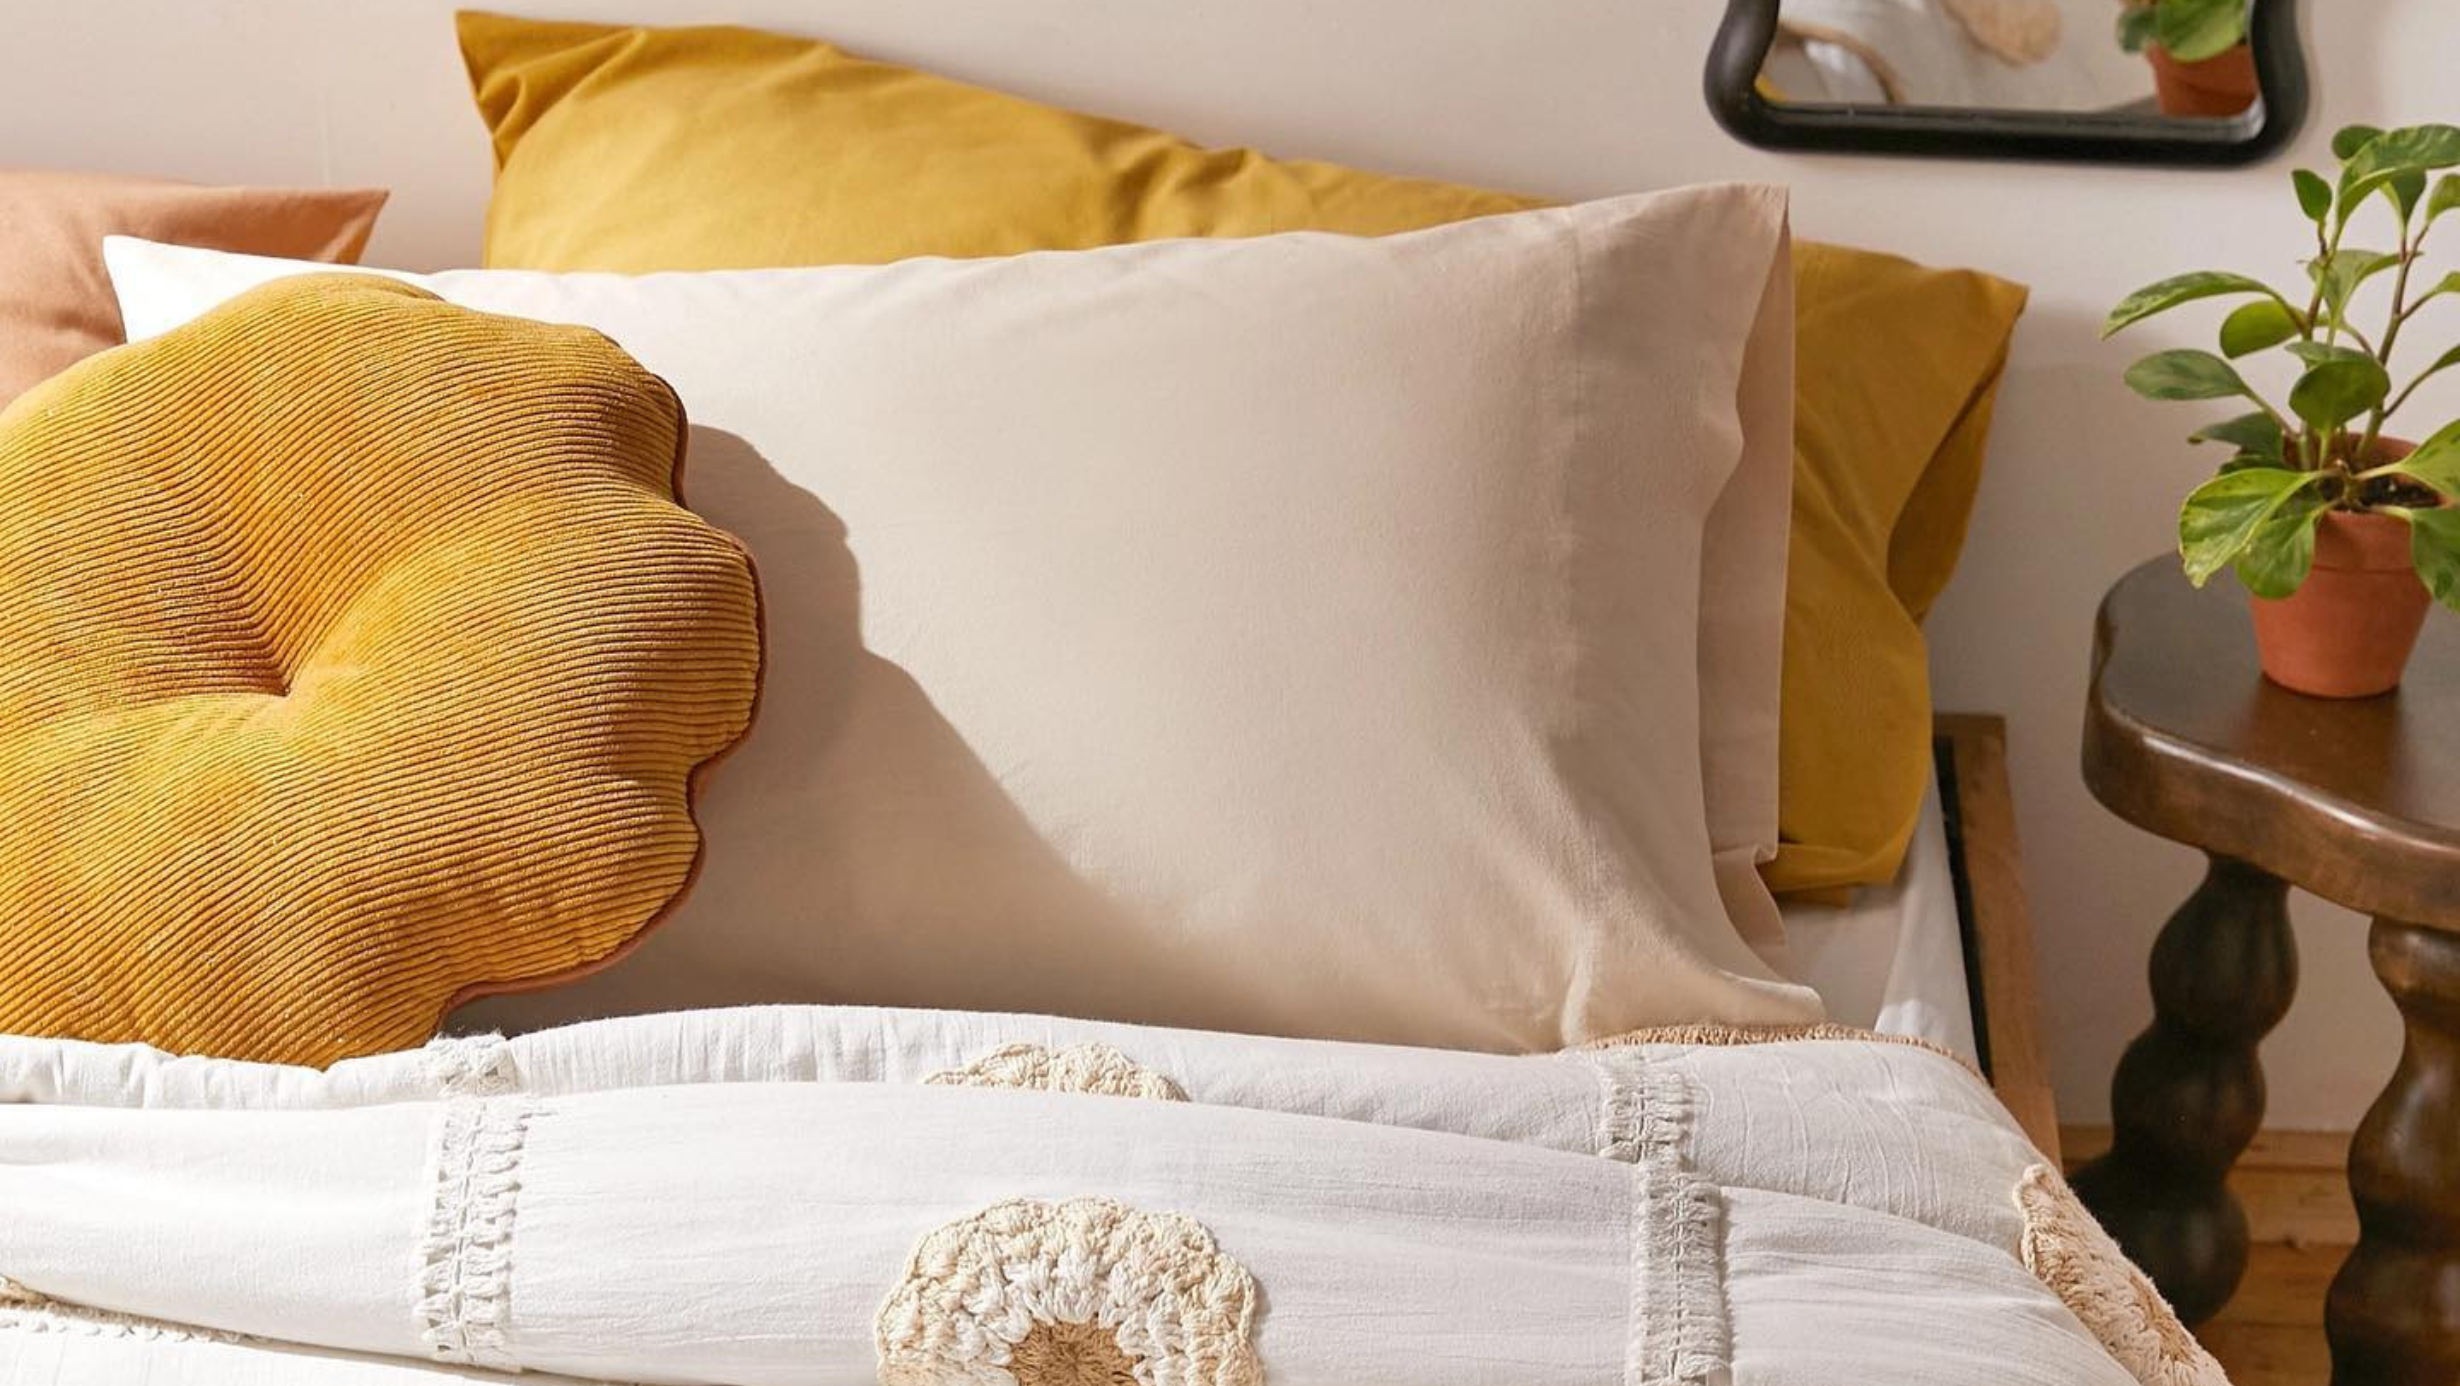 Back To School: The Best College Bedding Picks